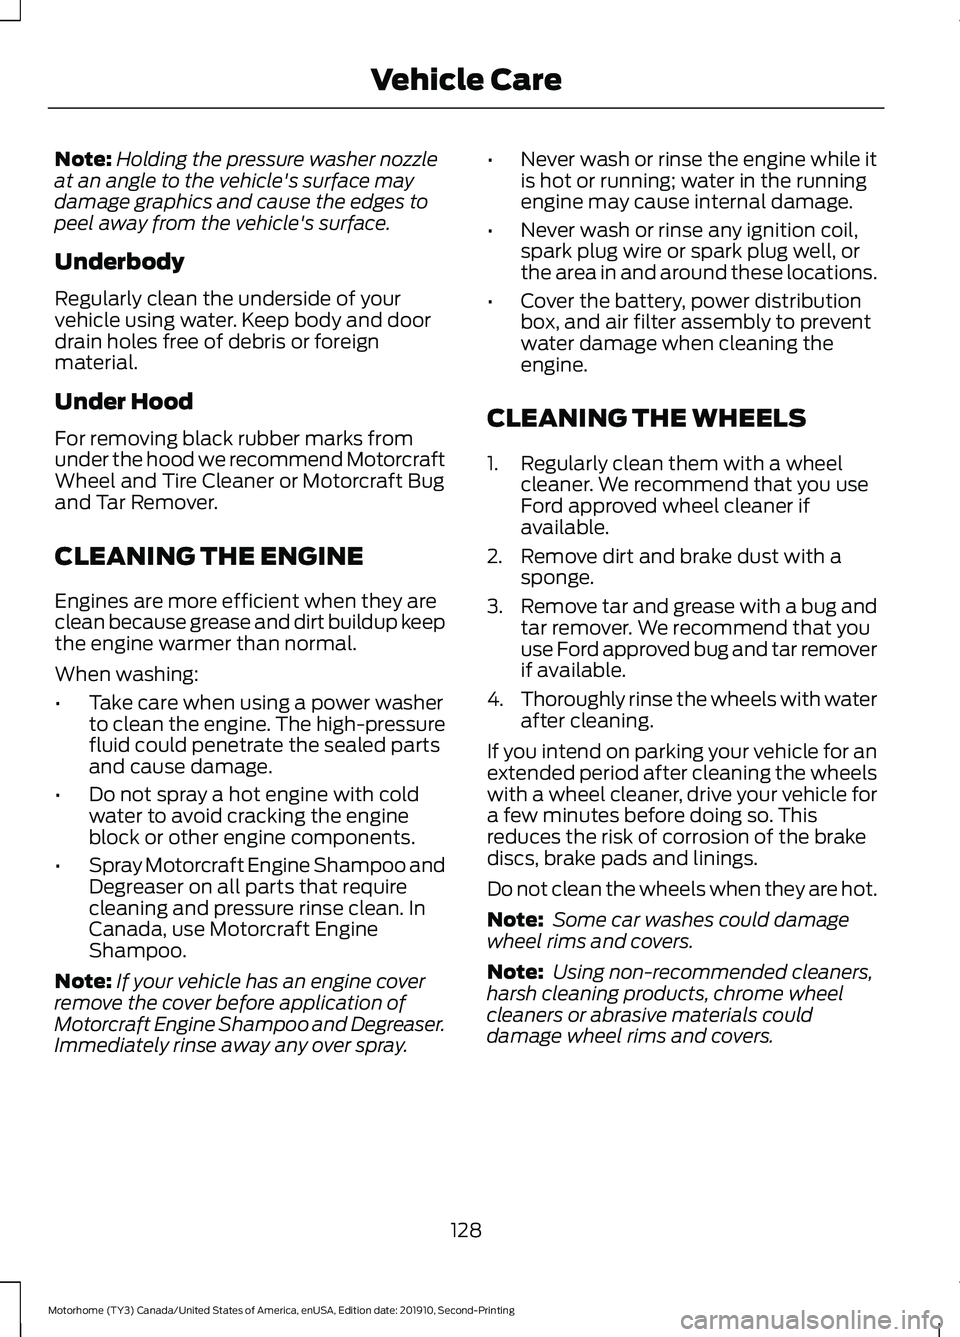 FORD F-53 2020  Owners Manual Note:
Holding the pressure washer nozzle
at an angle to the vehicle's surface may
damage graphics and cause the edges to
peel away from the vehicle's surface.
Underbody
Regularly clean the und